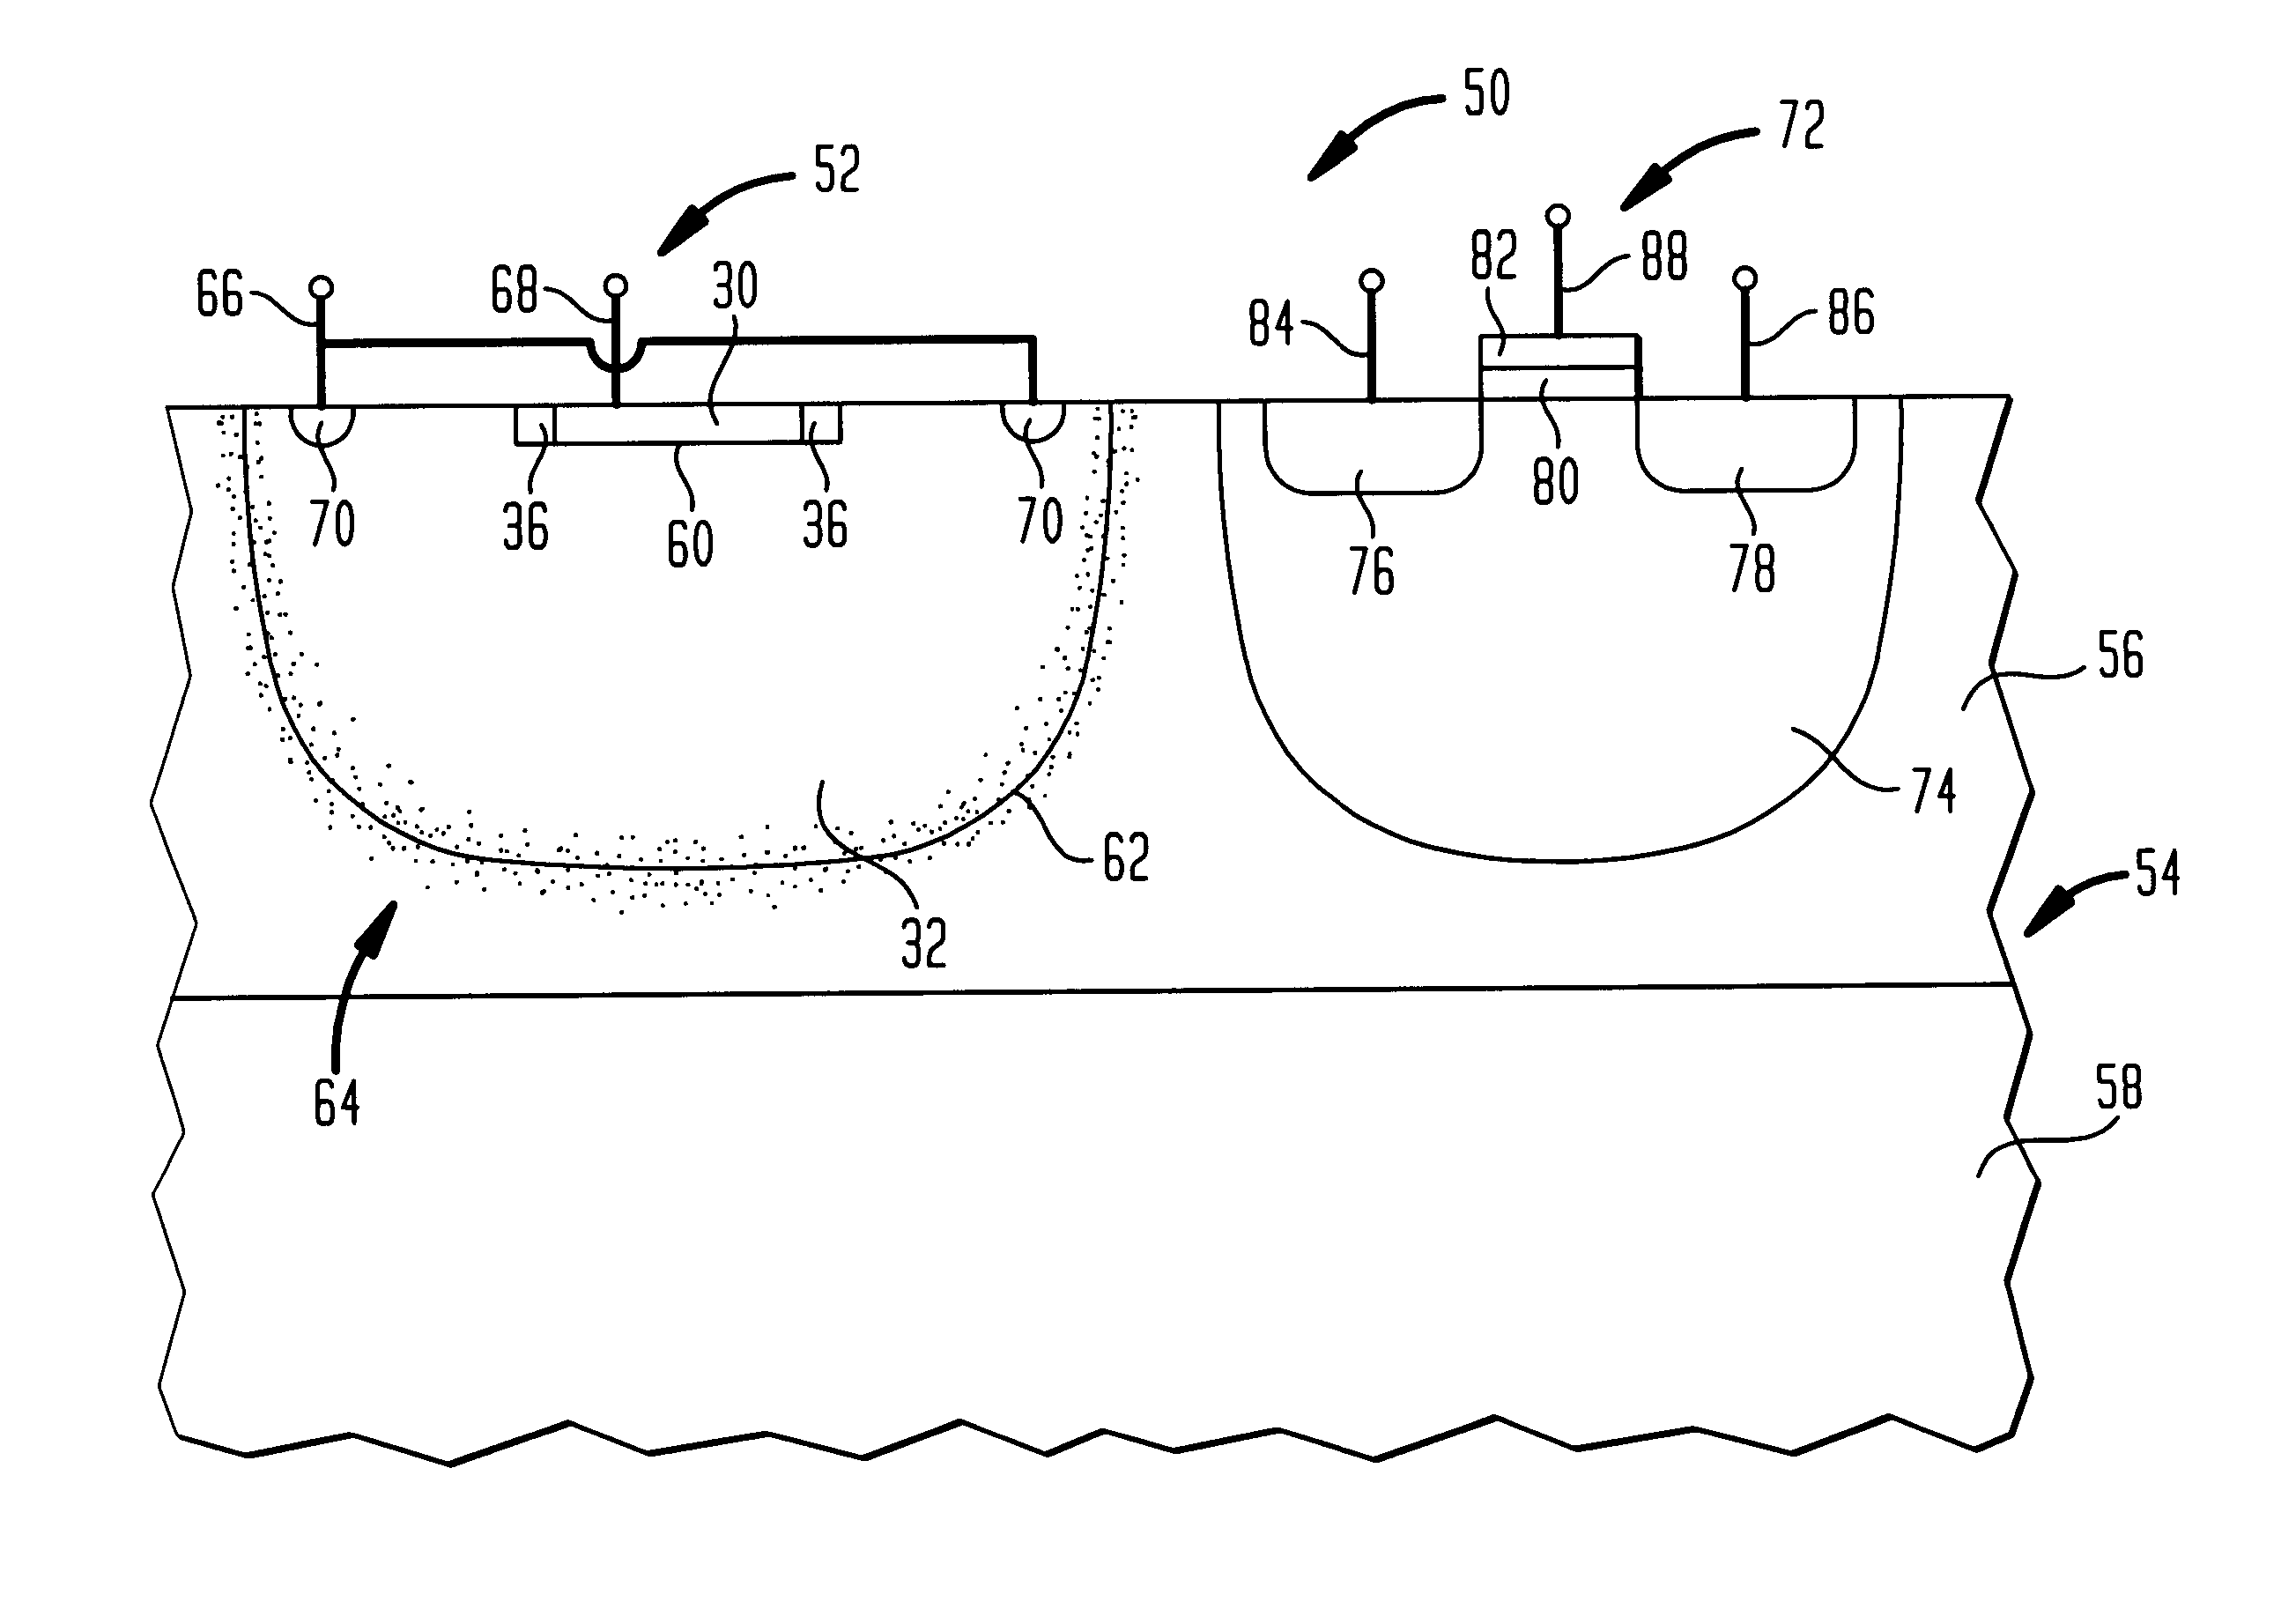 Integrated optoelectronic device with an avalanche photodetector and method of making the same using commercial CMOS processes